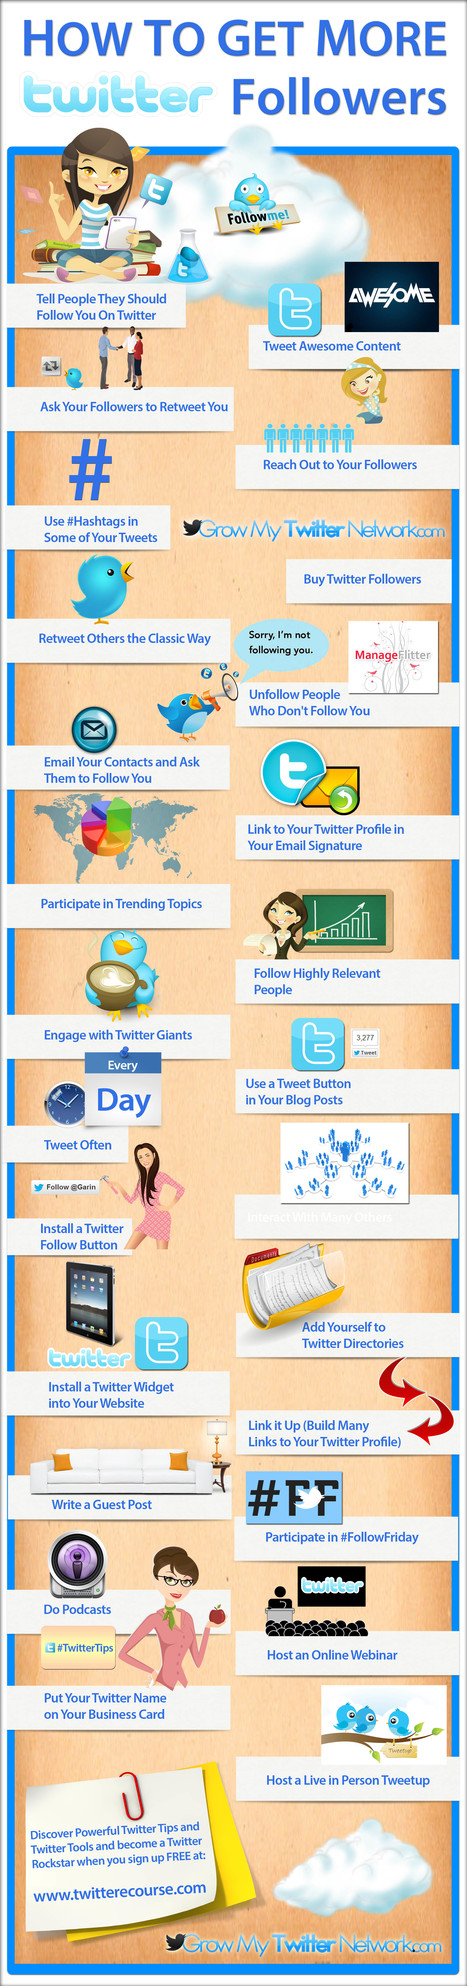 How To Get More Twitter Followers | Visual.ly | Web 2.0 for juandoming | Scoop.it